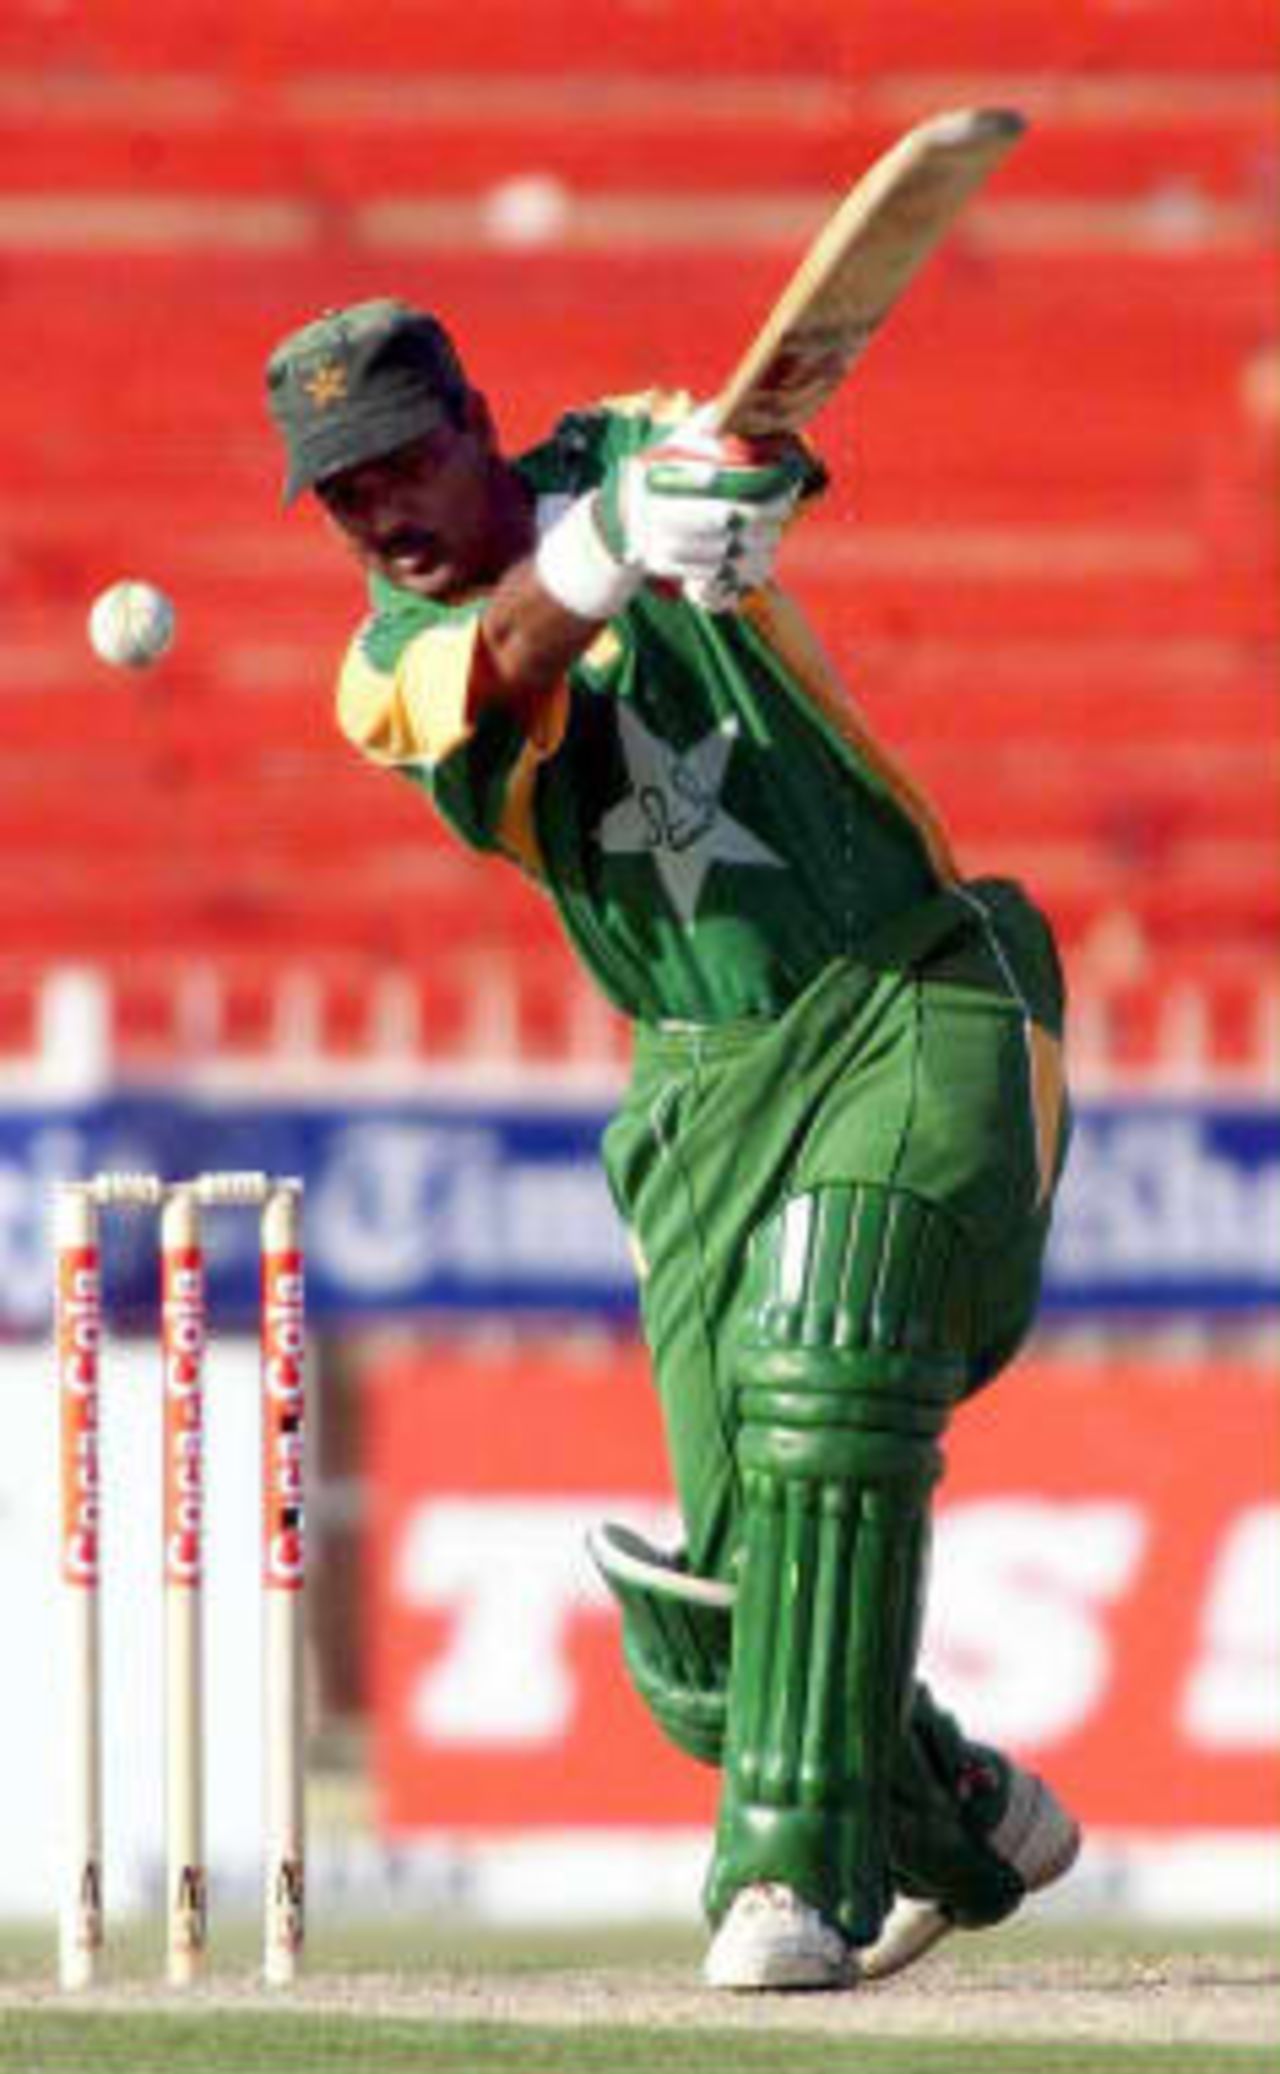 Ijaz Ahmed batting on his way to his magnificent 137 against England on 7th April 1999 at Sharjah in the Coca Cola Cup.